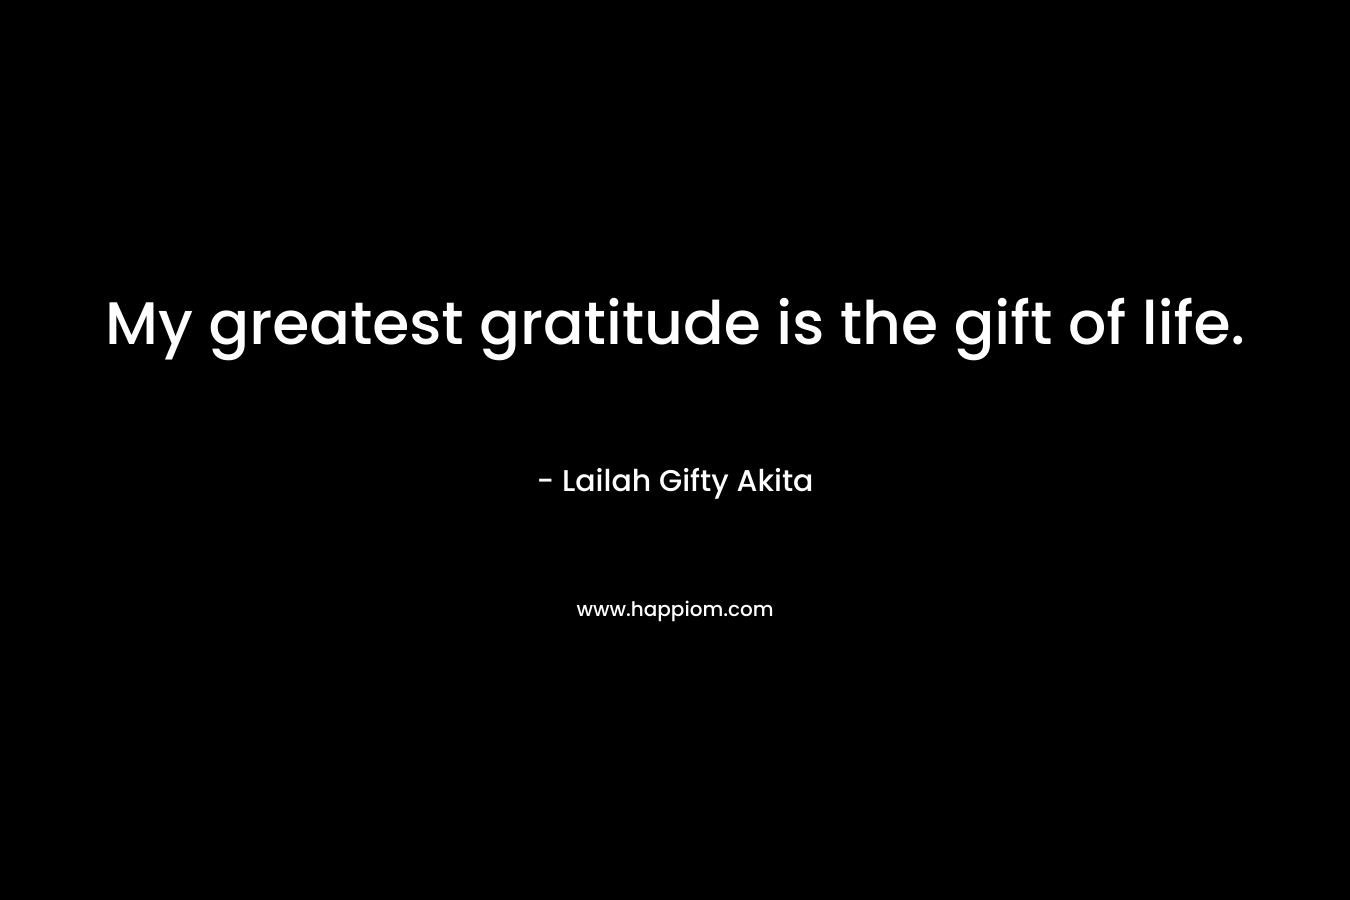 My greatest gratitude is the gift of life.